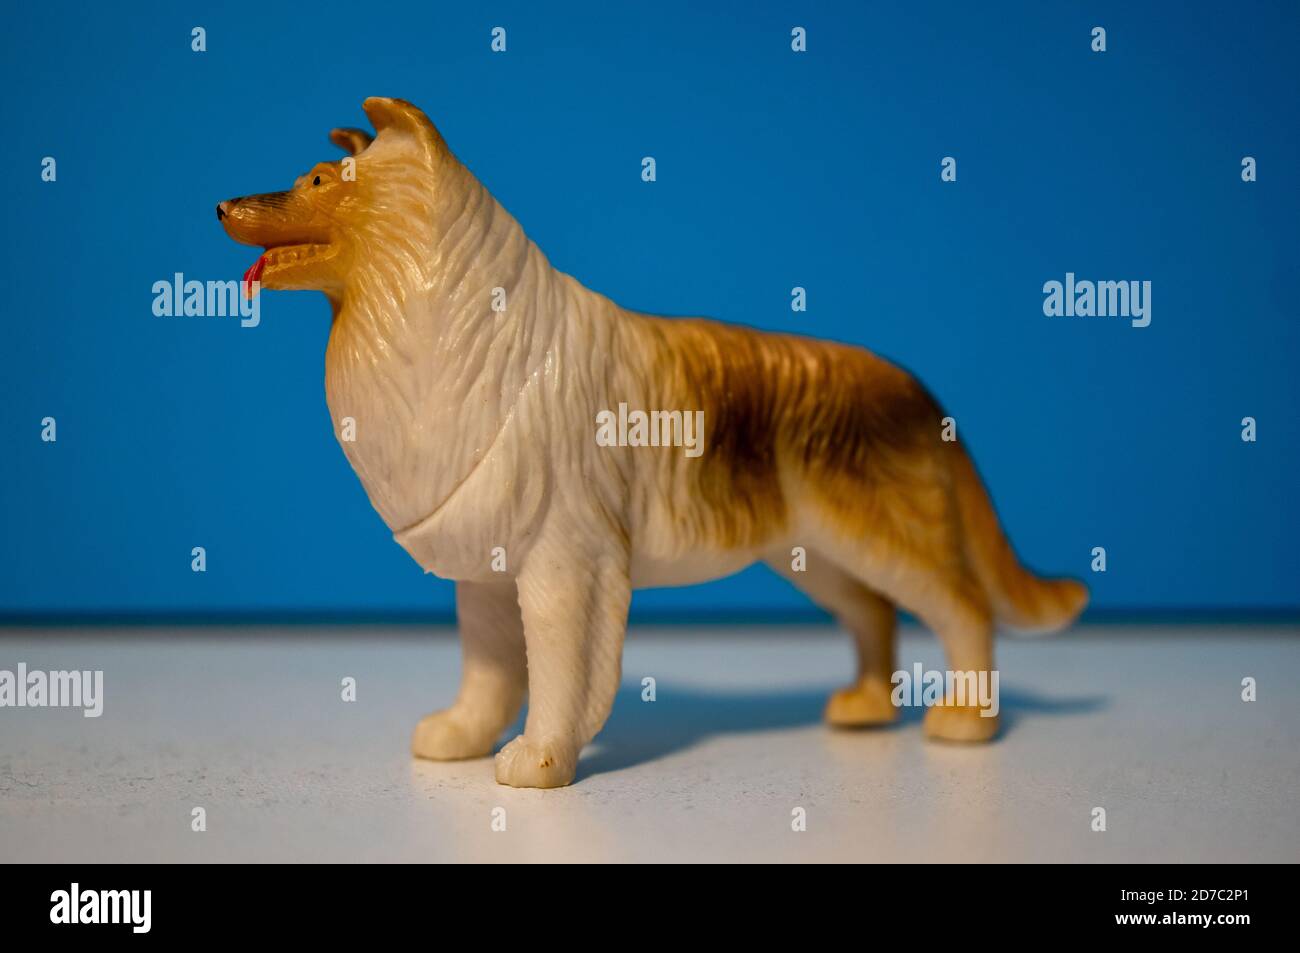 Closeup of a Rough Collie toy figurine on blue background Stock Photo